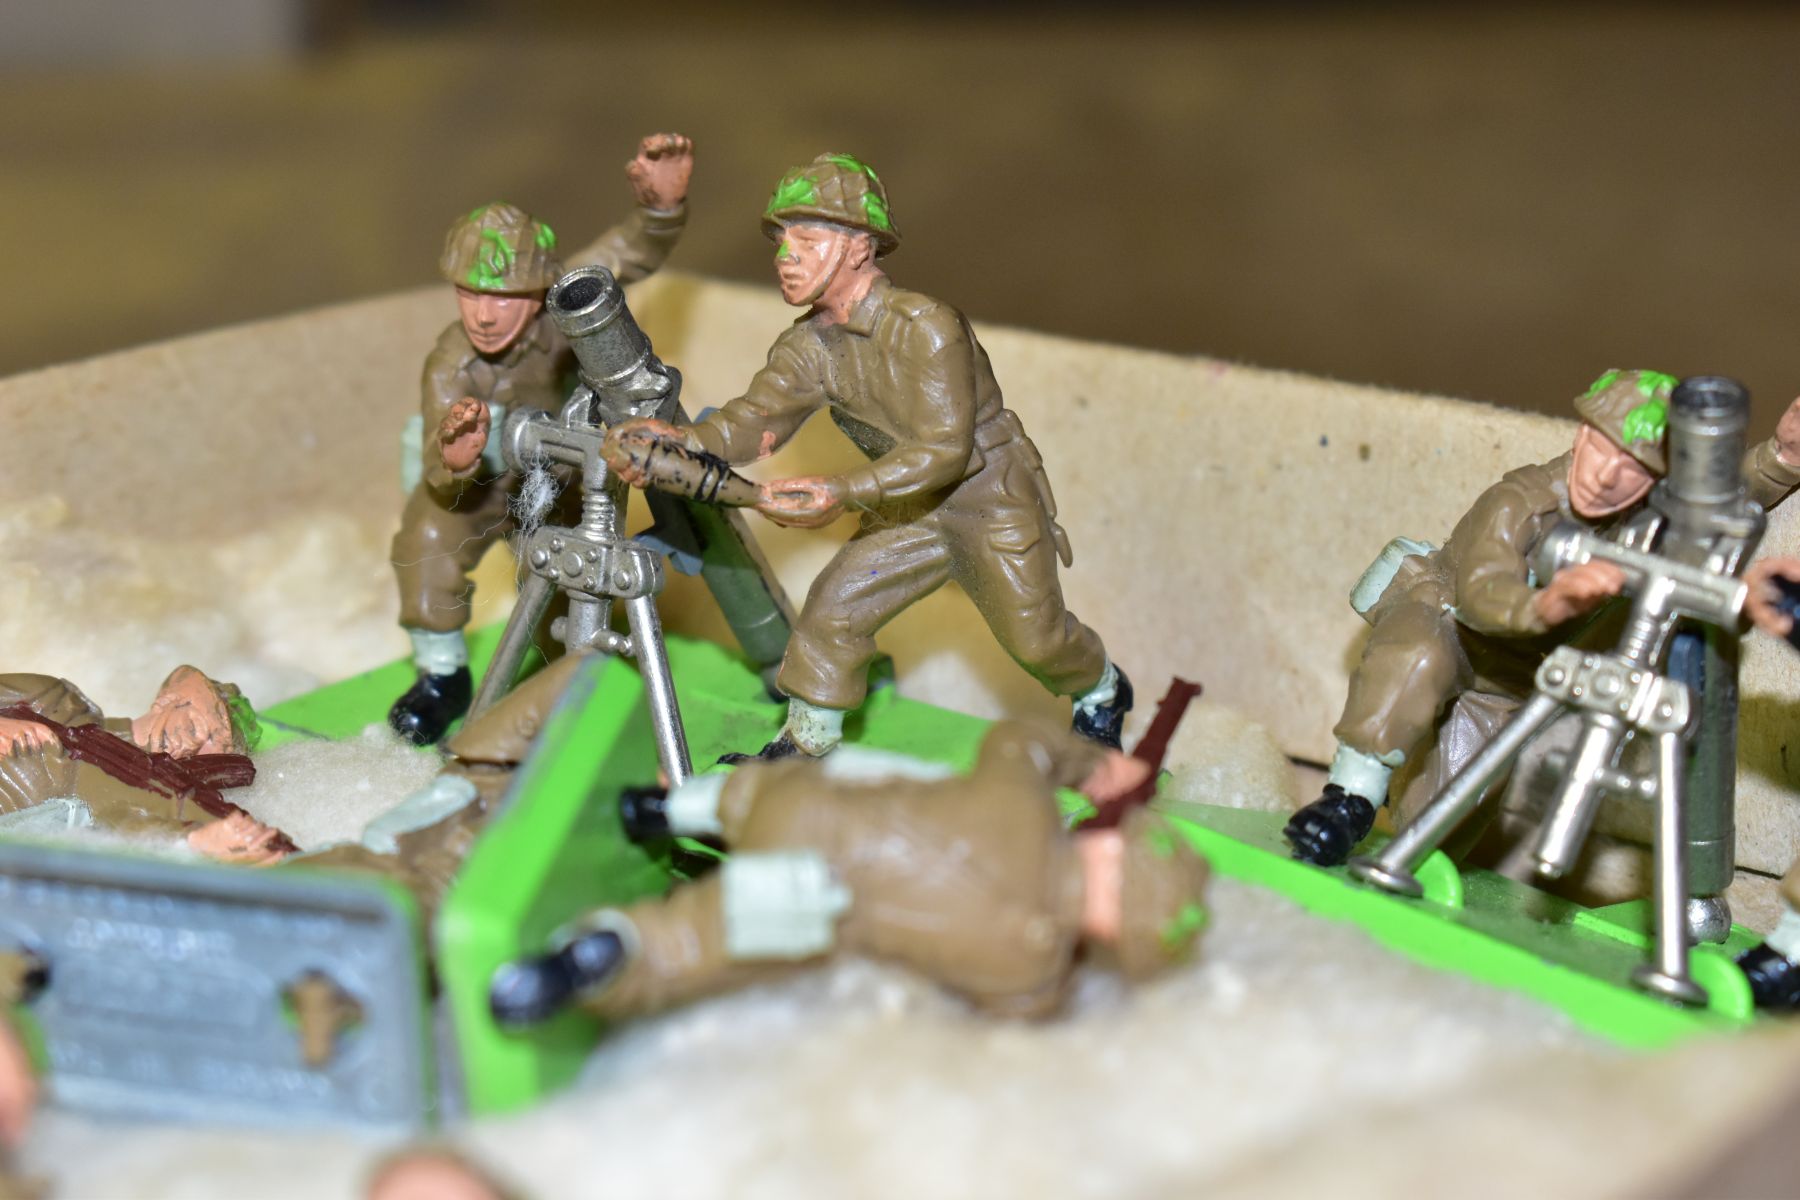 A QUANTITY OF BRITAINS AND AIRFIX 1/32 SCALE SOLDIER FIGURES, many have been painted and detailed to - Image 11 of 13